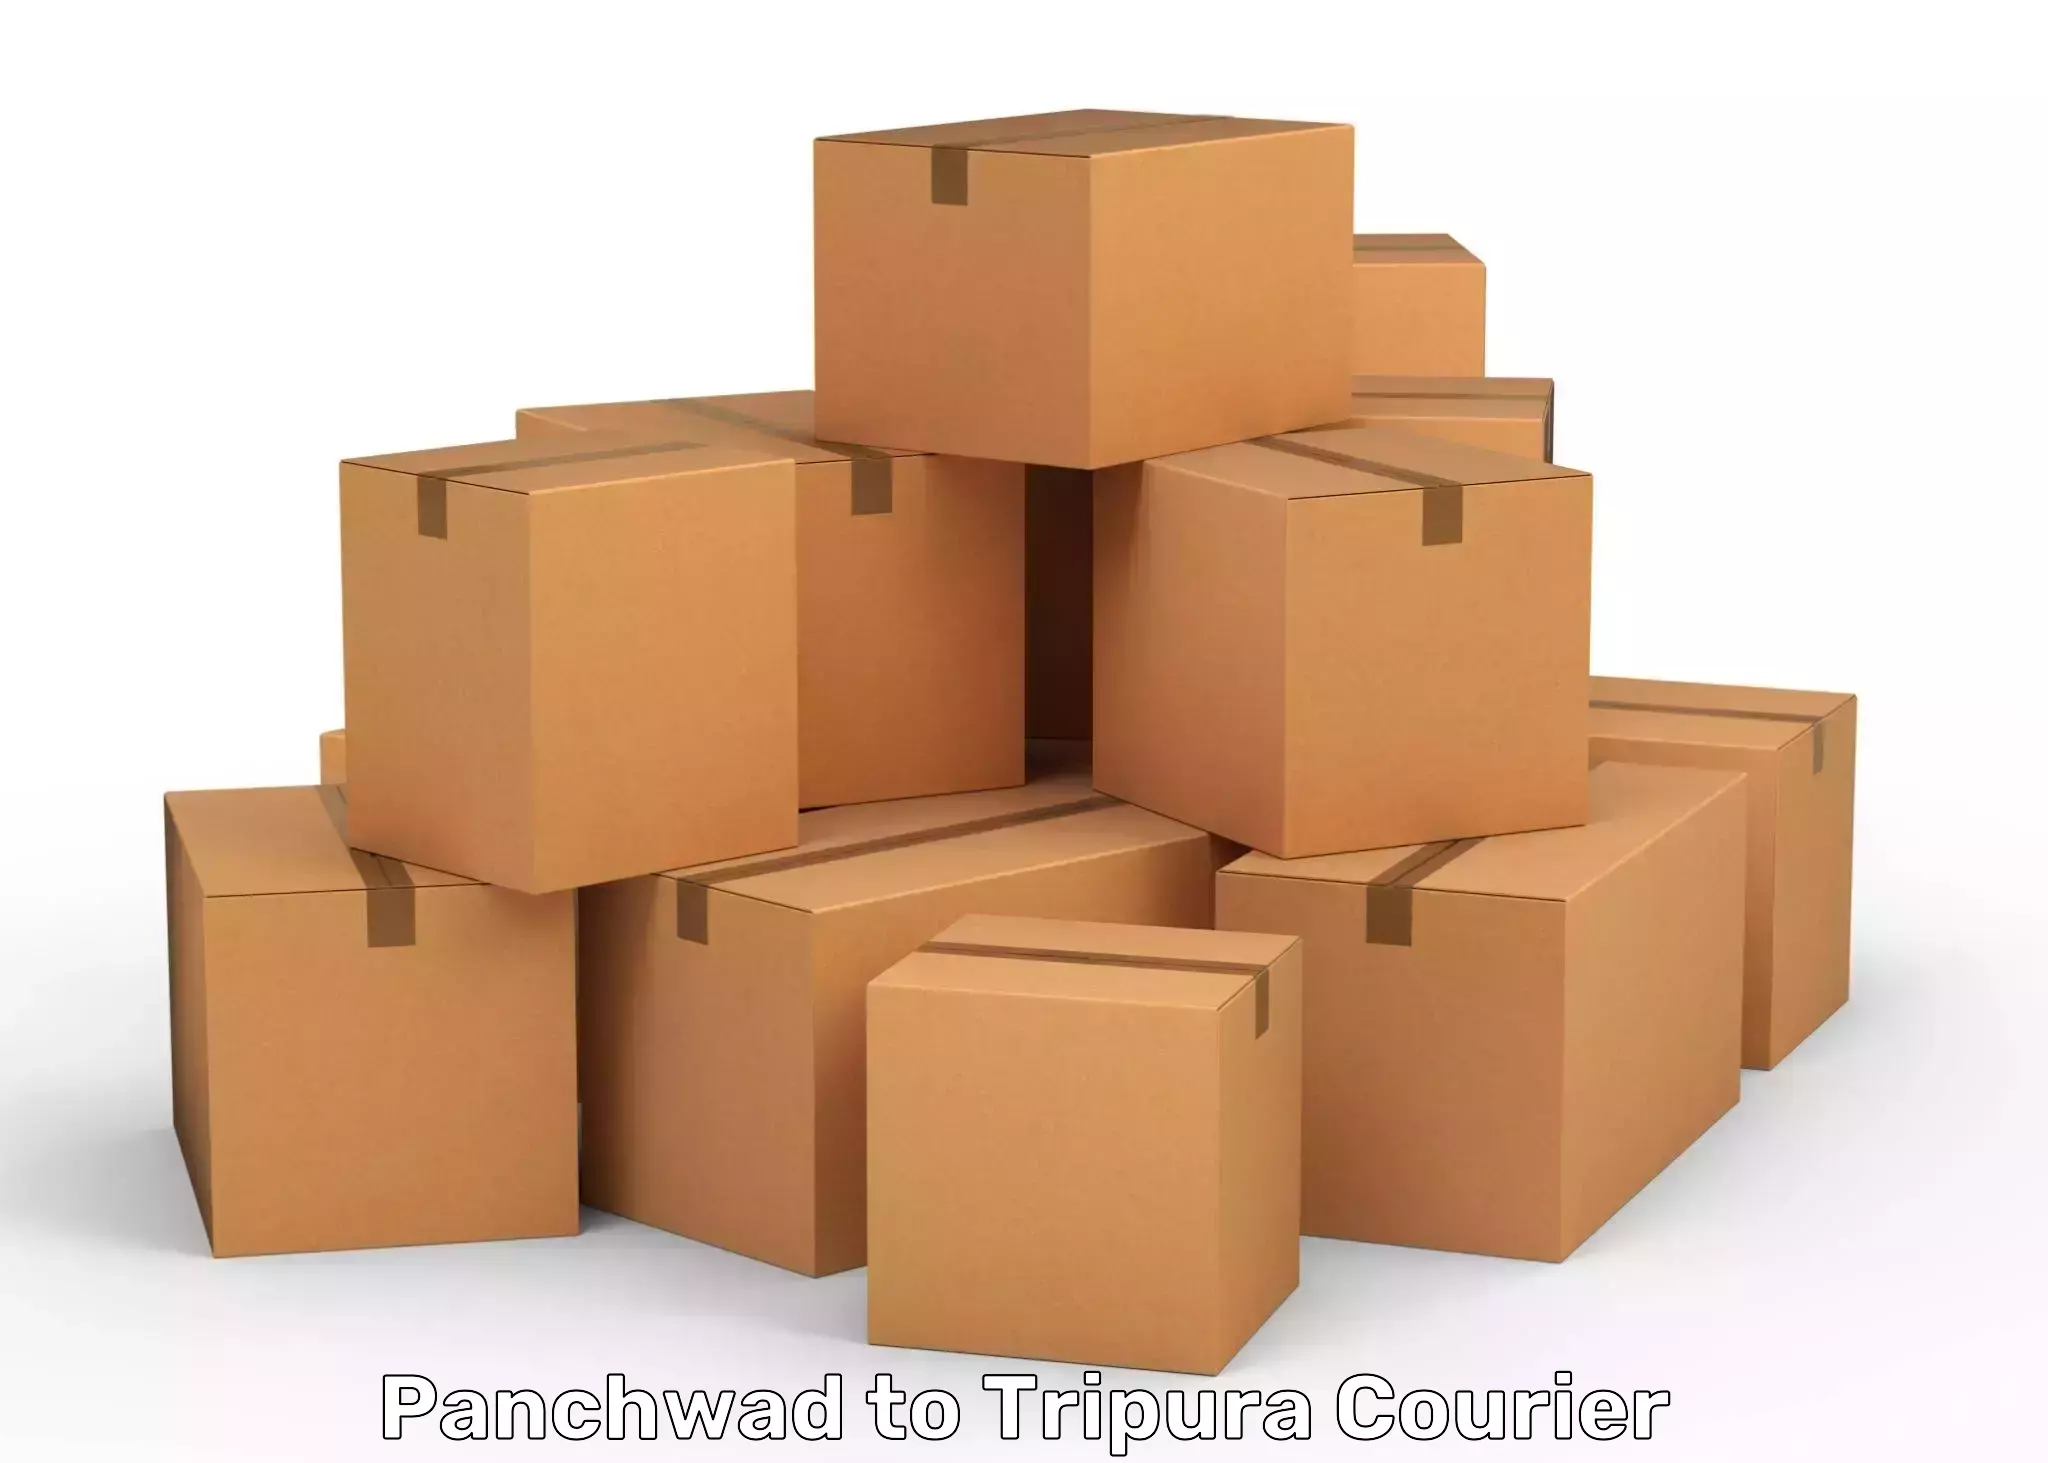 Customized shipping options Panchwad to Udaipur Tripura